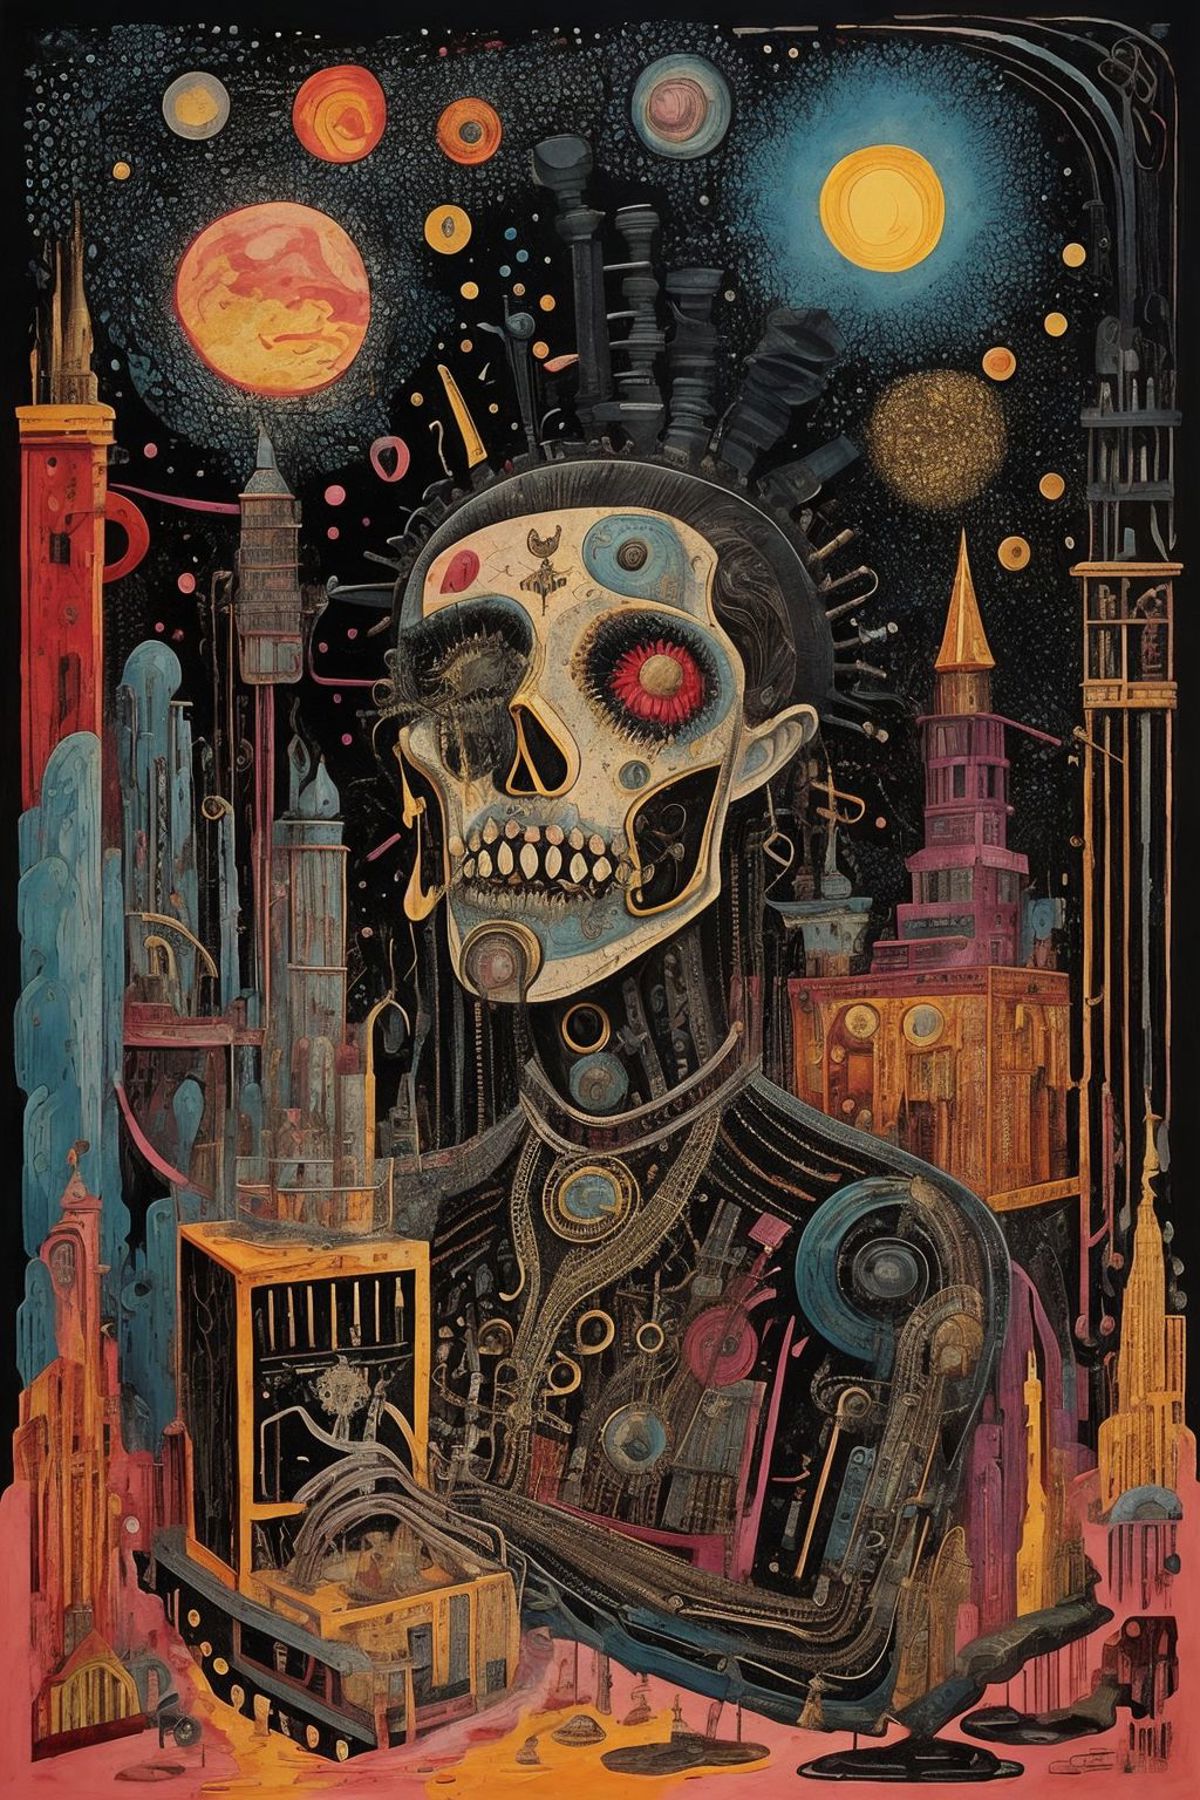 A nighttime scene of a skeleton with a city skyline in the background.